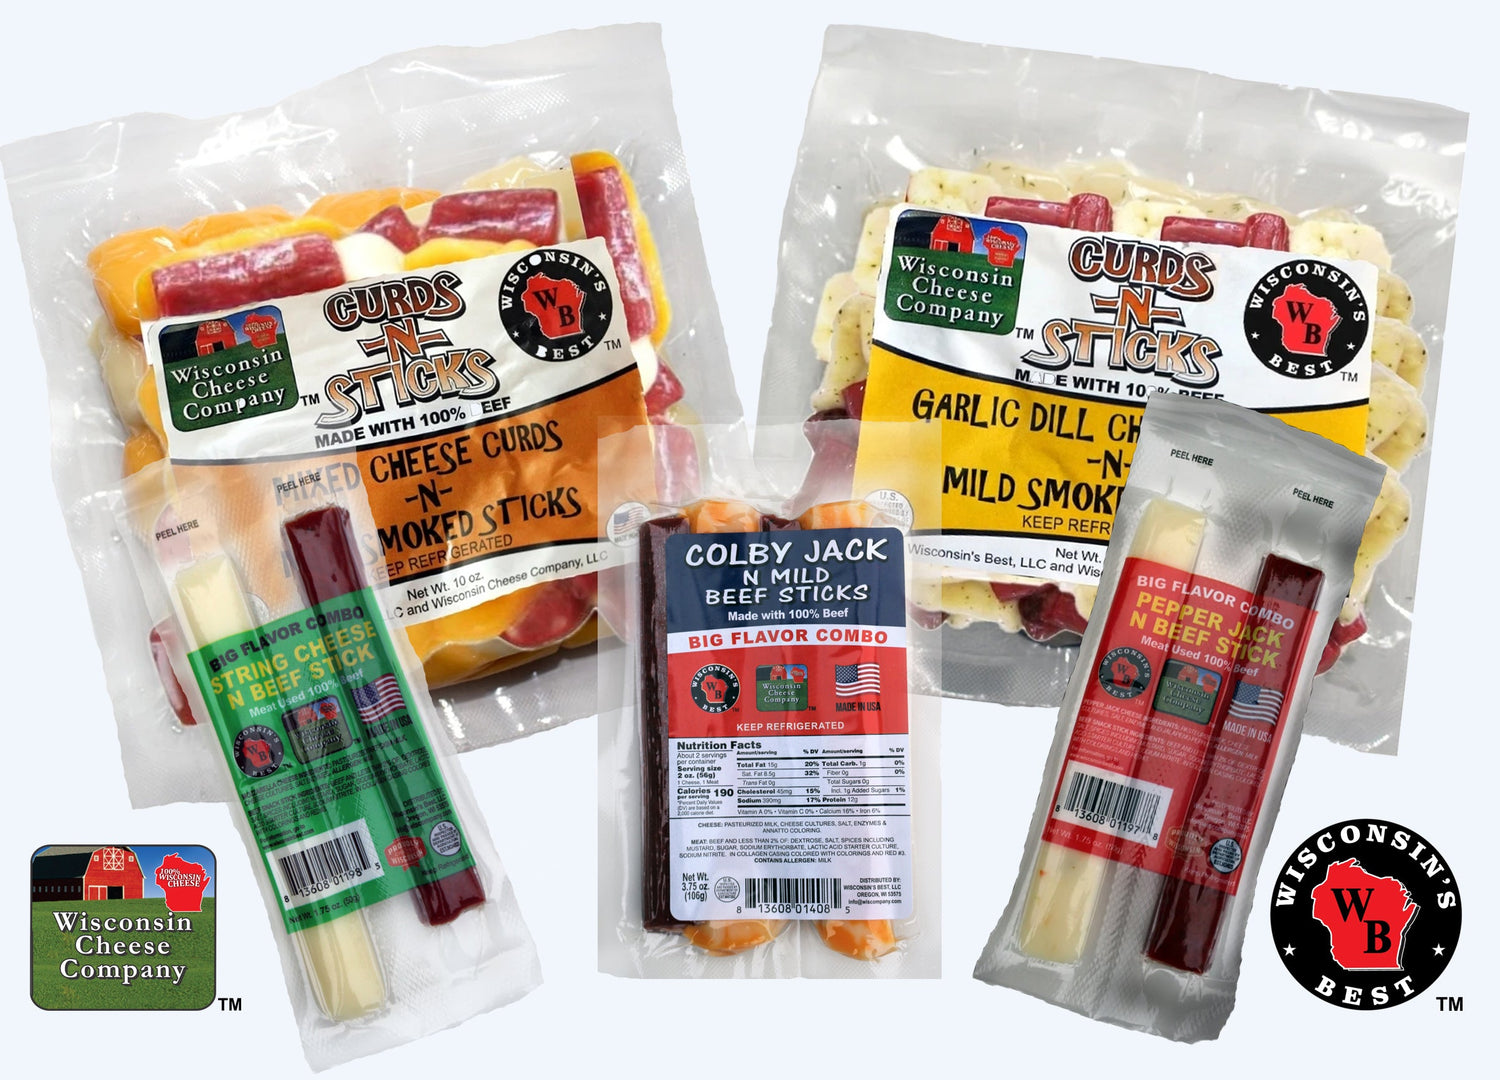 Cheese and beef snacks, featuring cheese curds and meat and cheese sticks